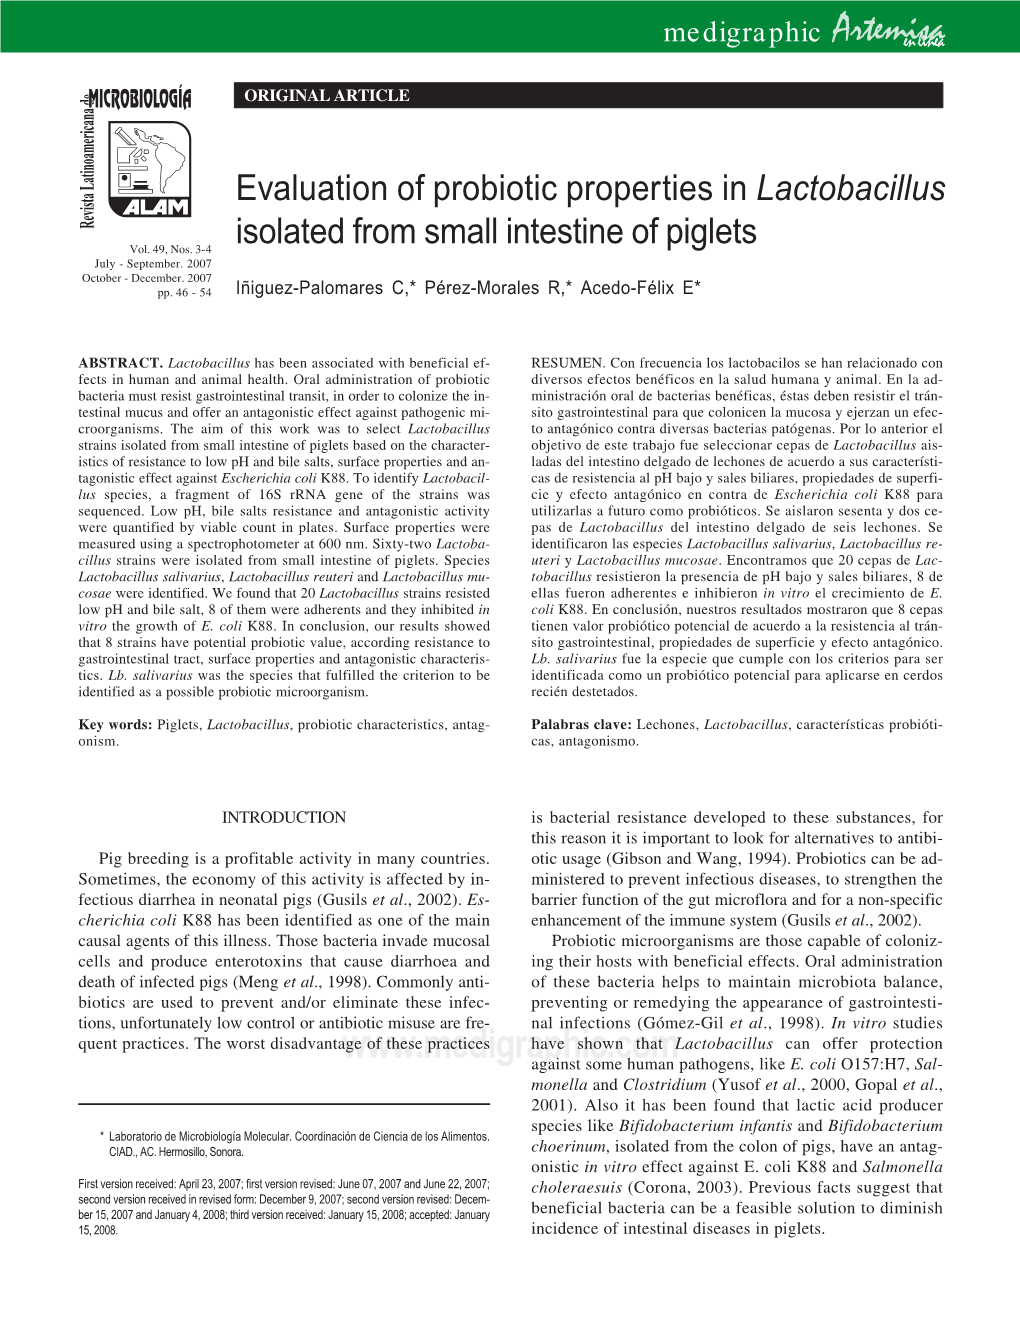 Evaluation of Probiotic Properties in Lactobacillus Isolated from Small Intestine of Piglets 47 Rev Latinoam Microbiol 2007; 49 (3-4): 46-54